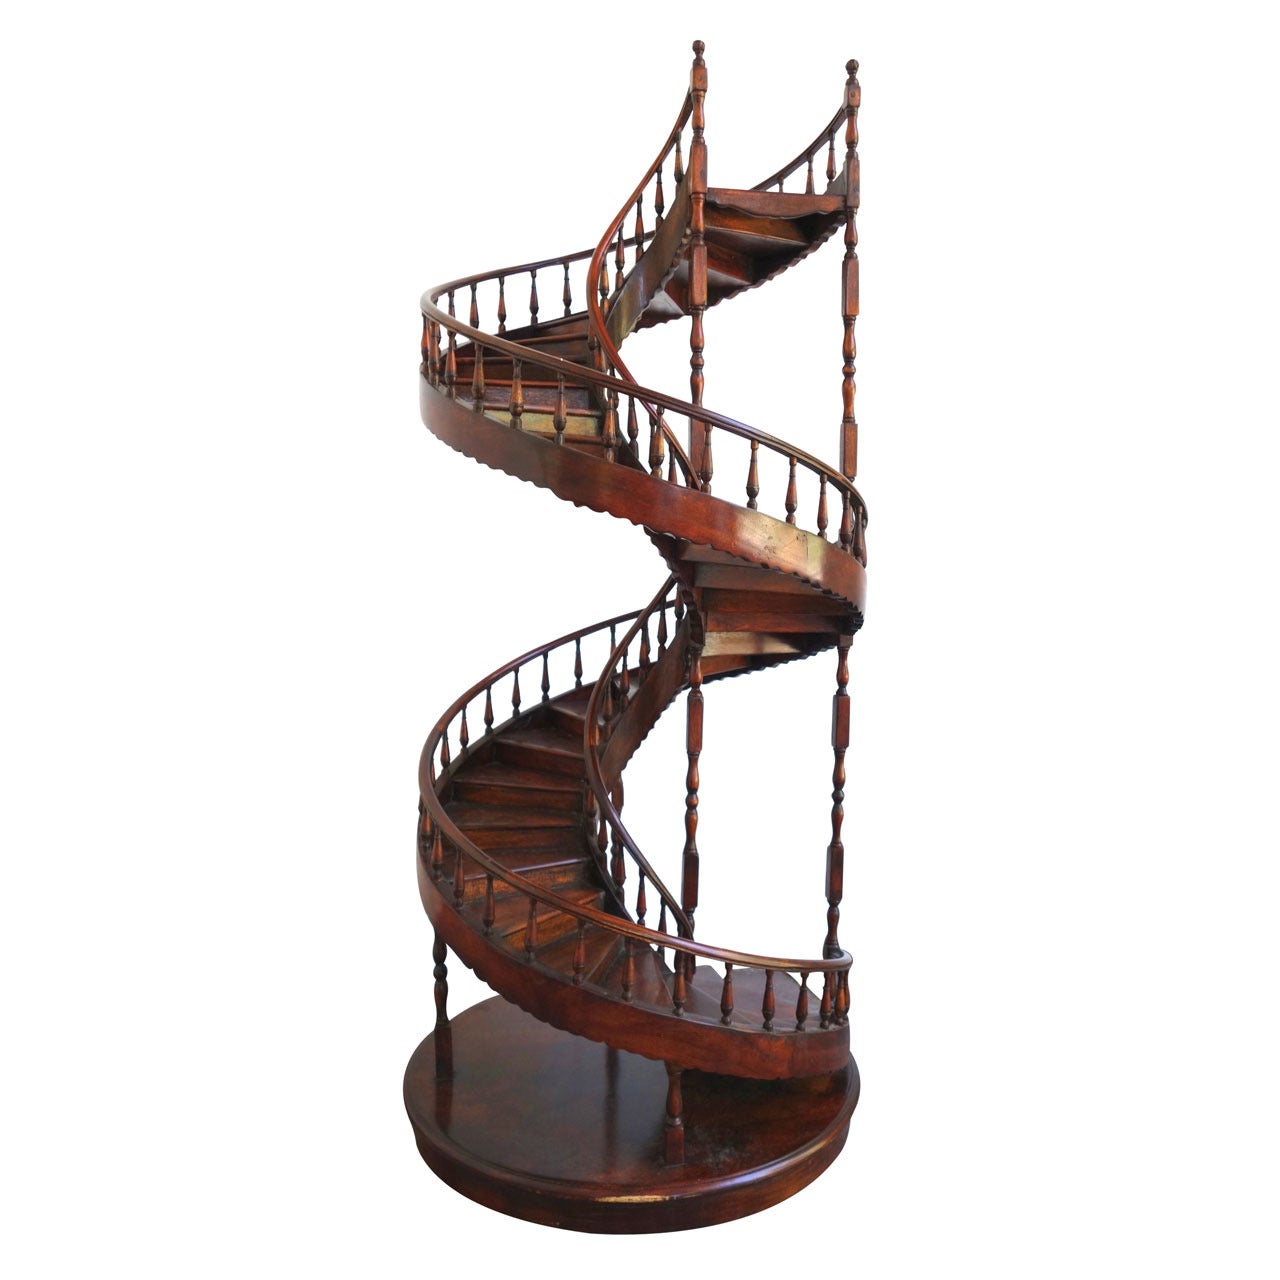 Impressive Spiral Staircase Model of Great Proportion, circa 1900